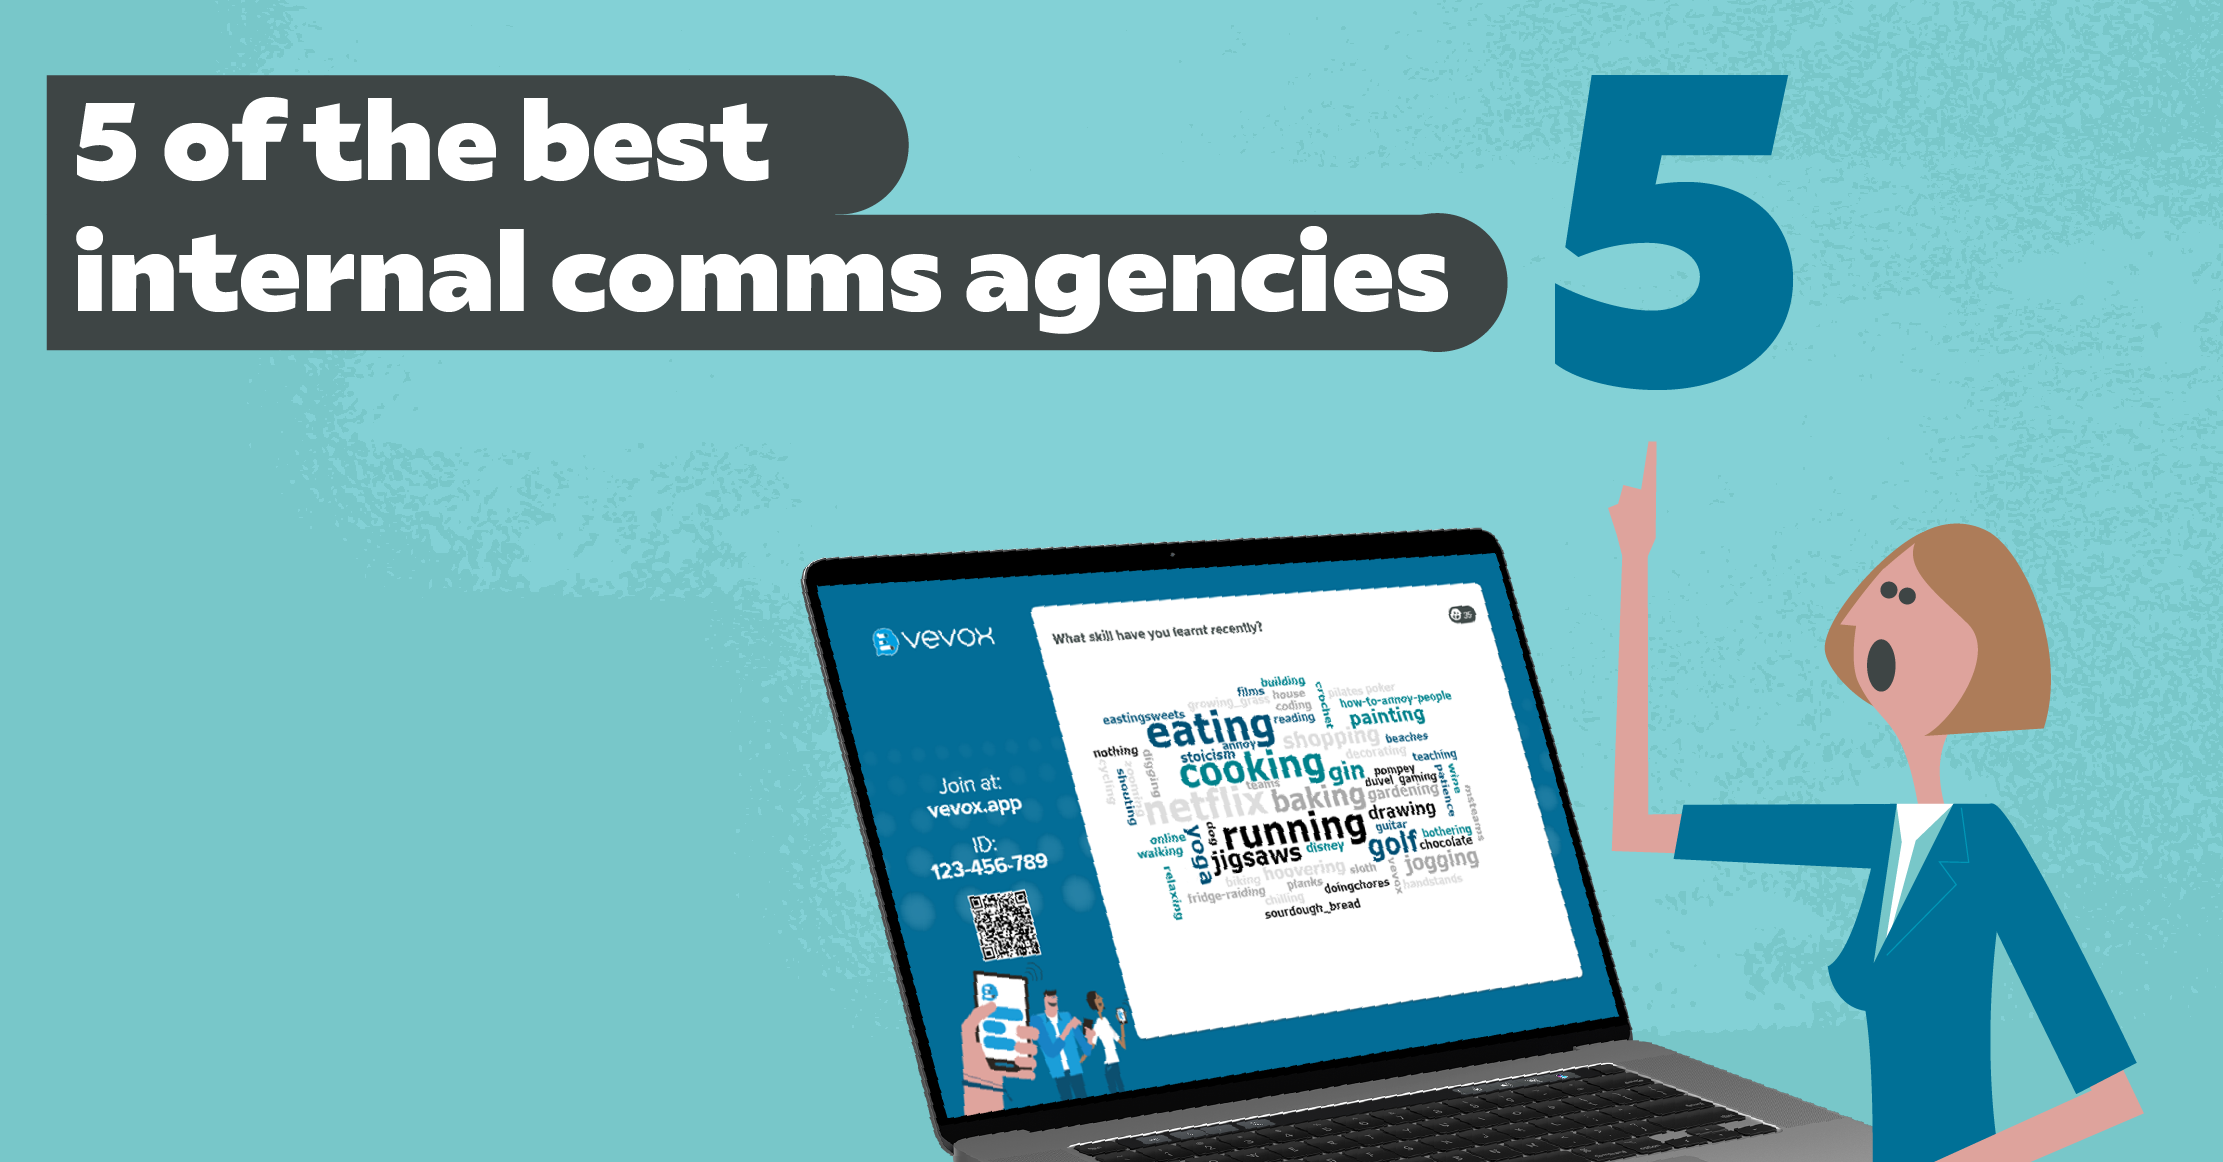 5 of the best internal communications agency